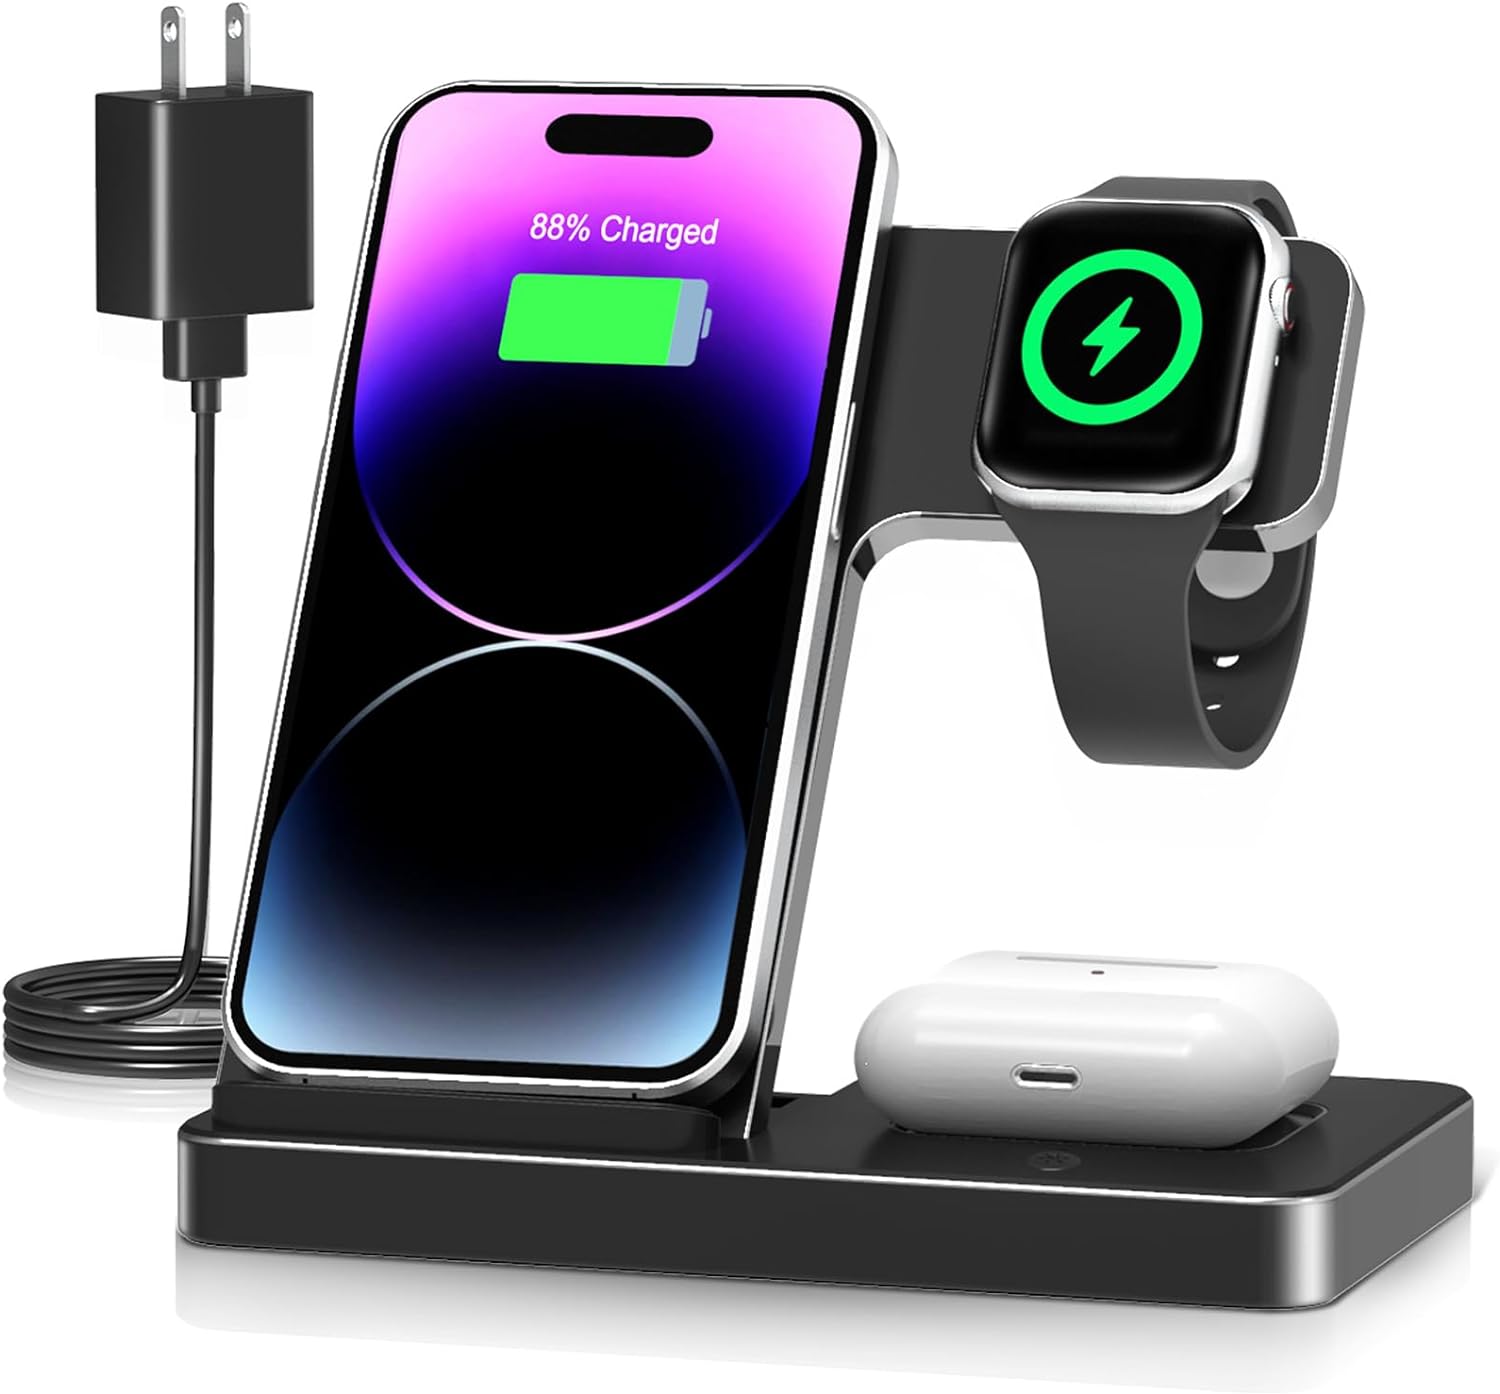 Ive had this 3 in 1 wireless charger for about a month now, and I have nothing but good things to report. It charges my phone, Apple Watch, and ipod very quickly. It is so easy to carry for travel because it folds flat. The magnet for the Apple Watch is strong enough to hold it in position. The iphone charger is fast and reliable. I also love how I dont need to add my actual Apple Watch charger to it like some other products Ive used. This one has all the chargers built in. It doesnt take up